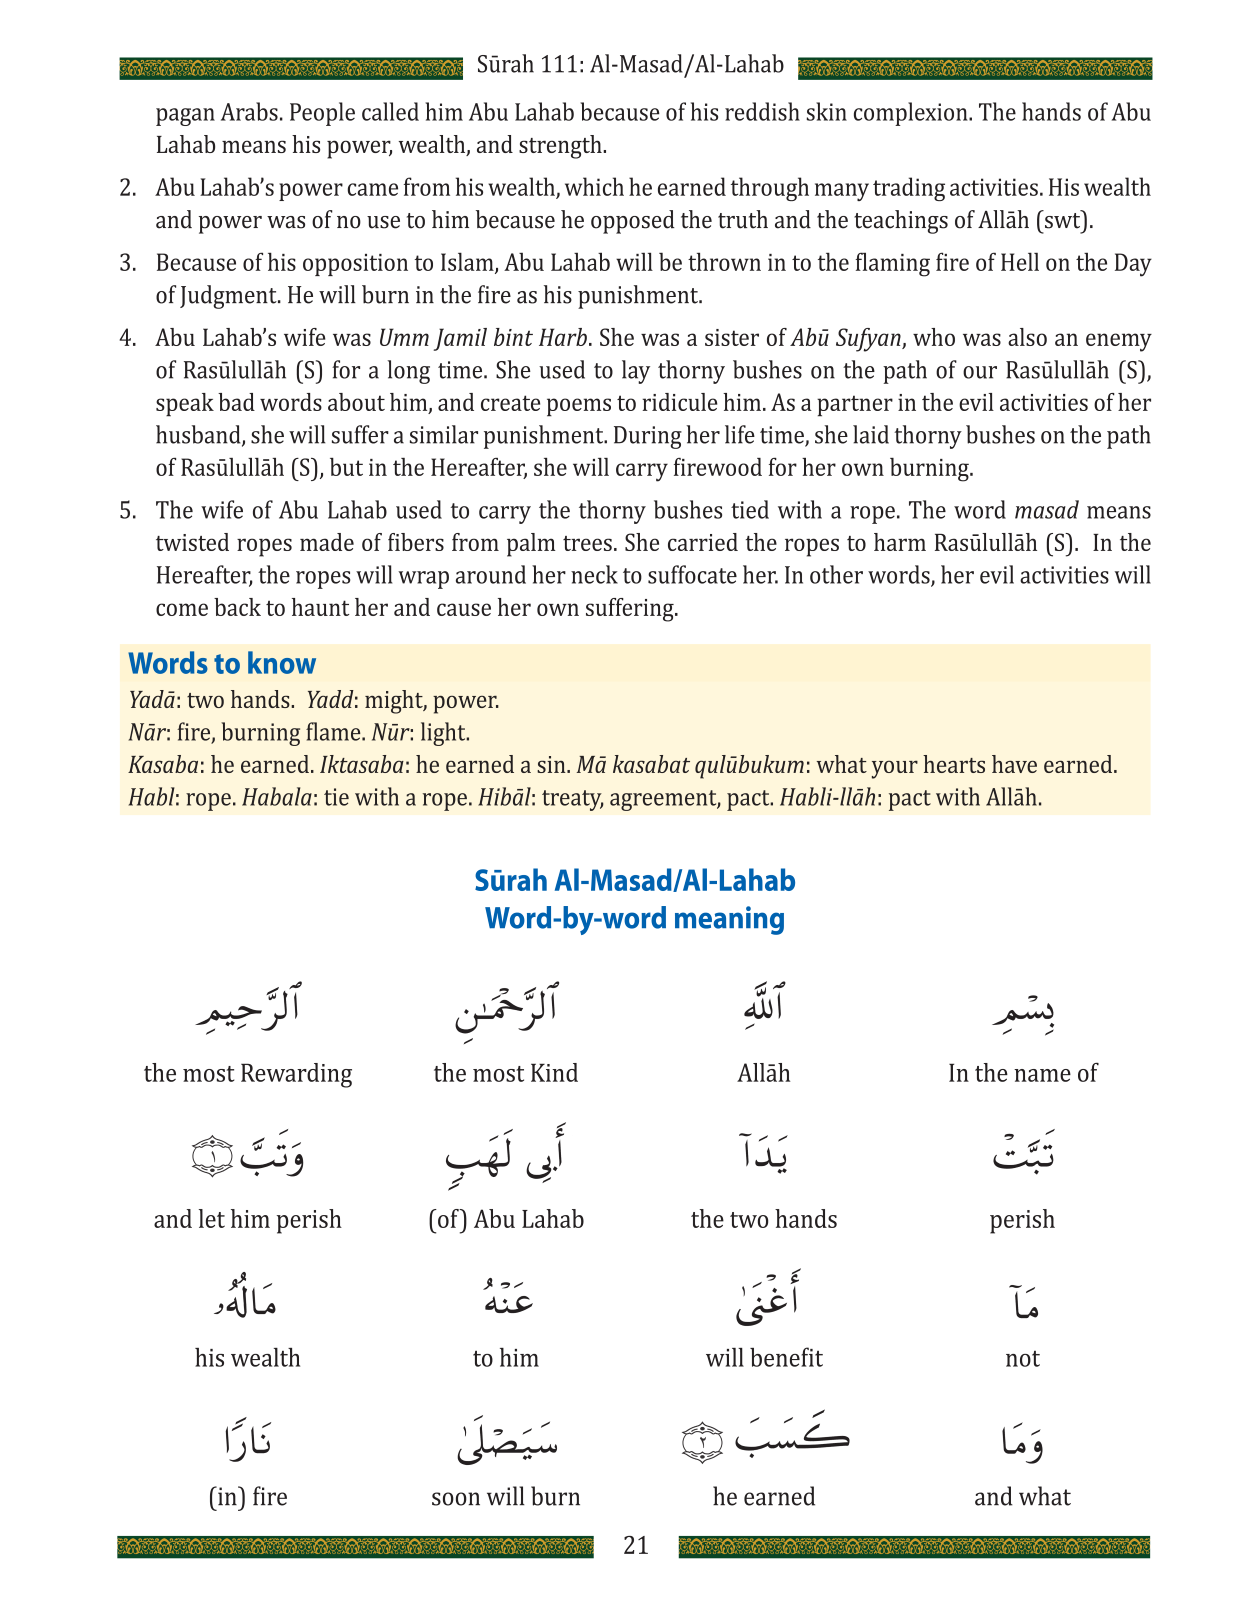 Juz Amma for School Students (With Transliteration) - Quran Studies - Weekend Learning - Surah 111 - Al Masad - Page 21